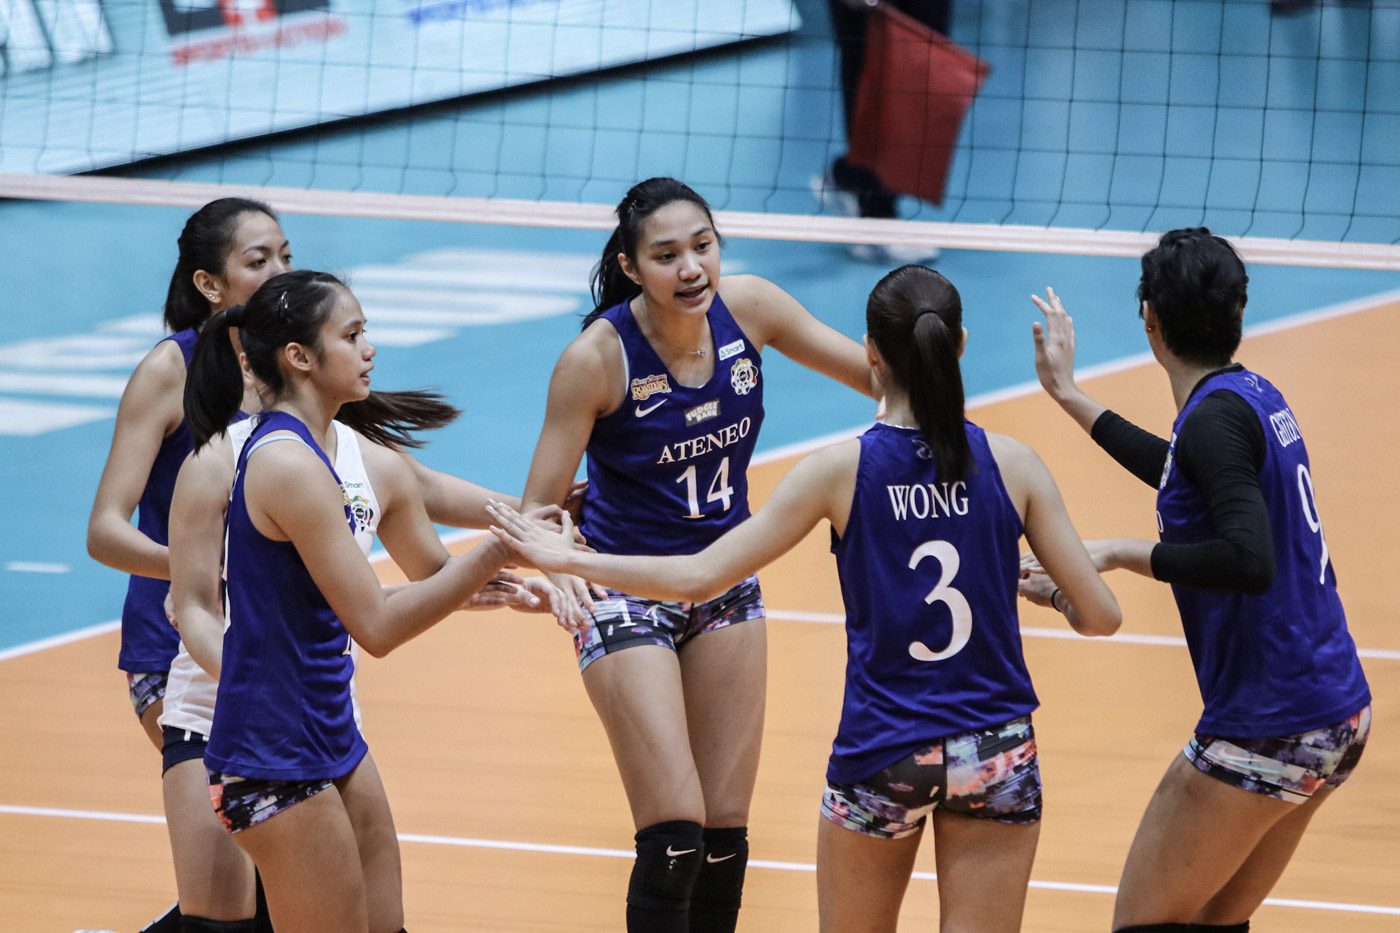 Ateneo Lady Eagles hold off Adamson for 3rd straight win